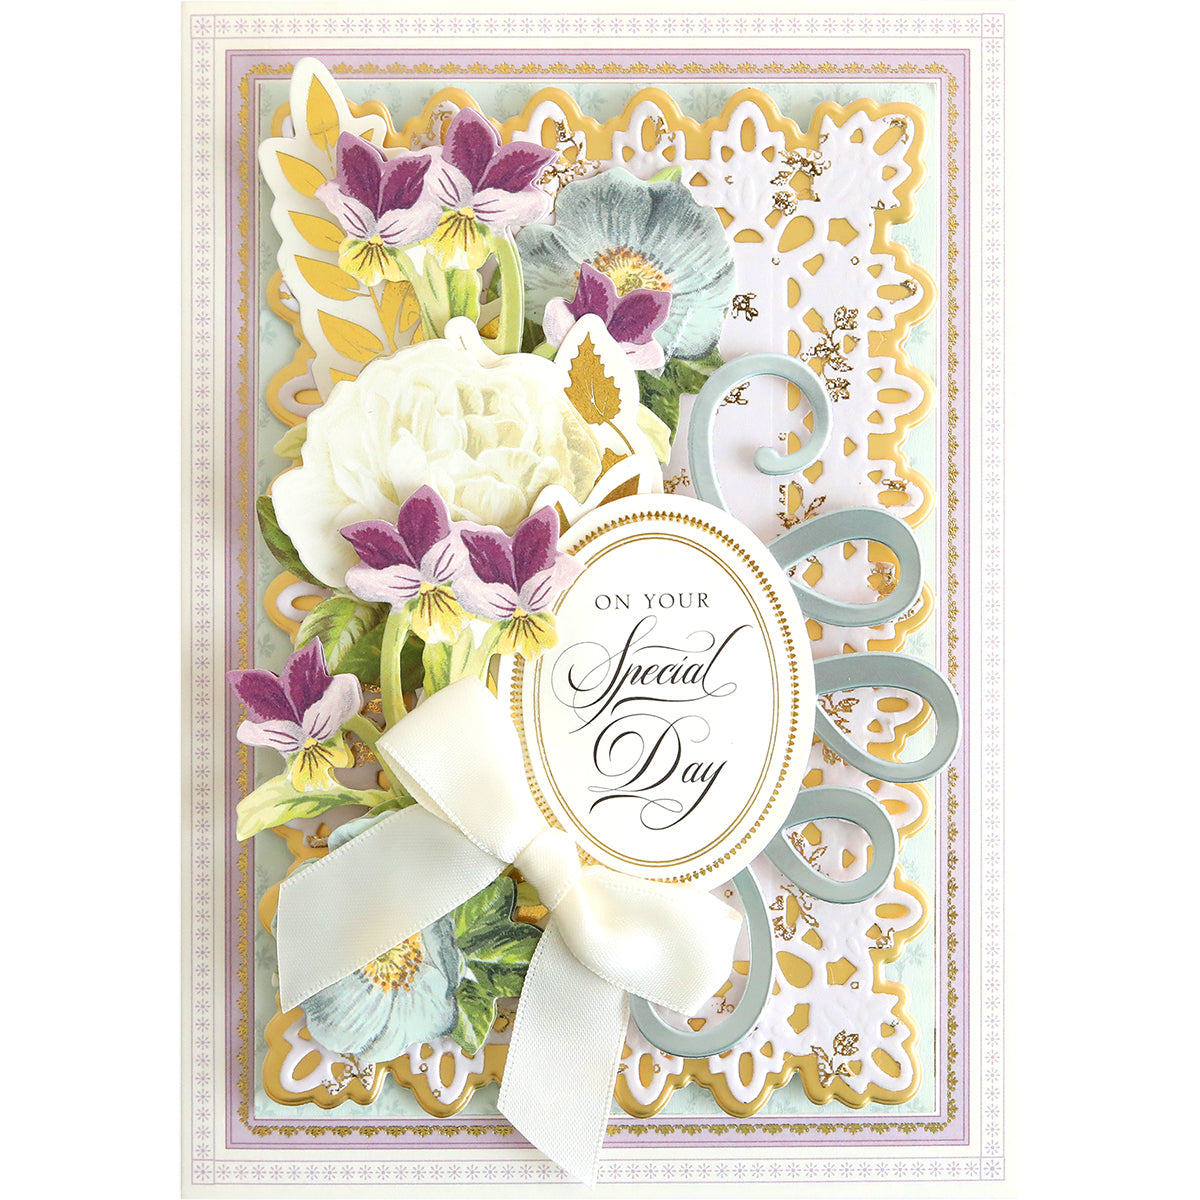 A fancy Flourish Die Bundle adorned with decorative details such as flowers and a bow, perfect for cardmaking projects.